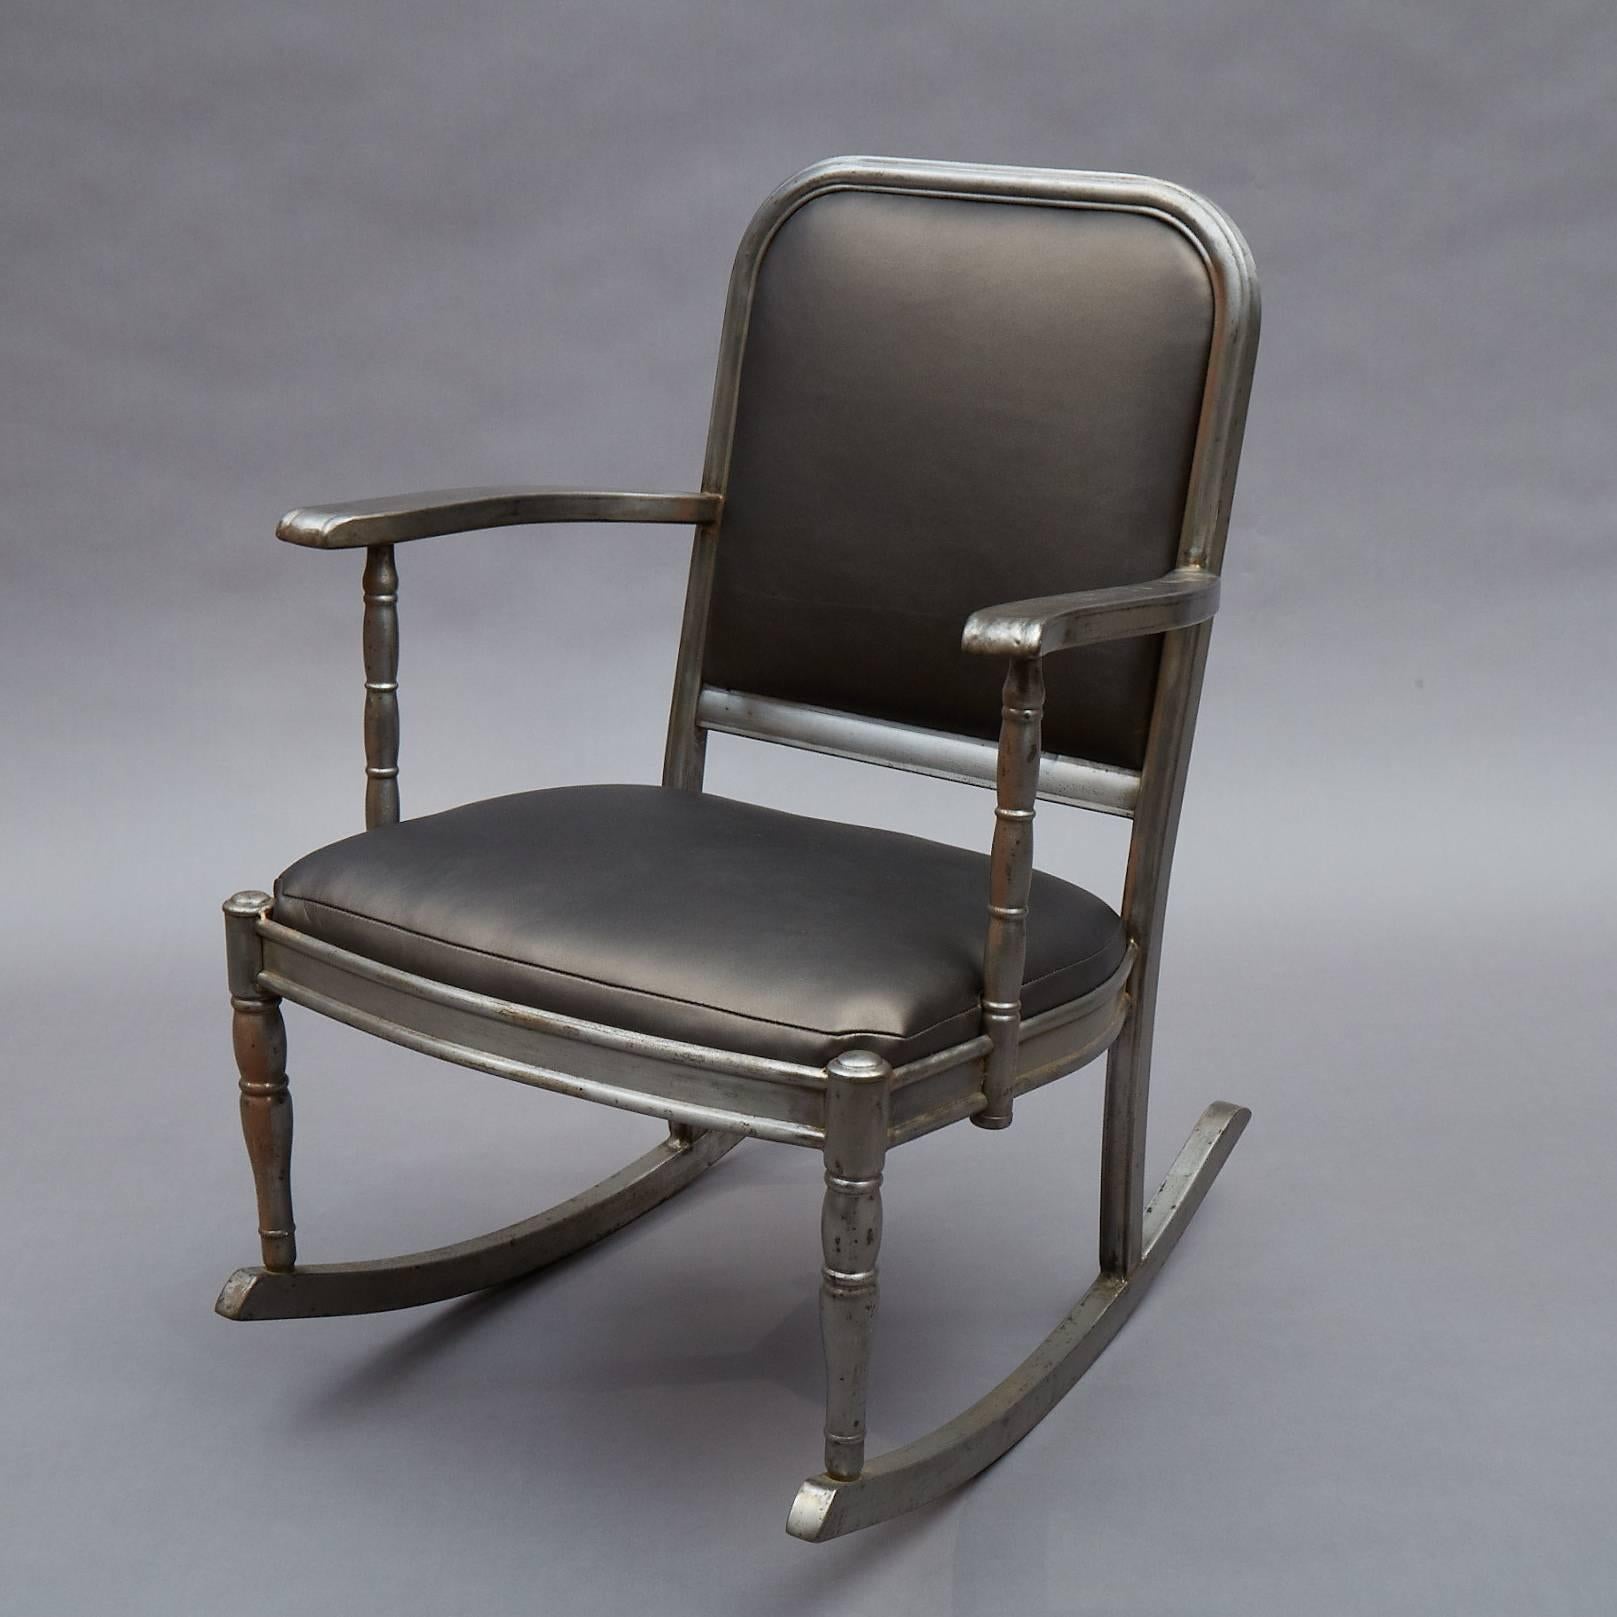 Industrial, institutional, brushed steel rocking chair upholstered in a gunmetal vinyl is from the Sheraton Series by Simmons Company Furniture.